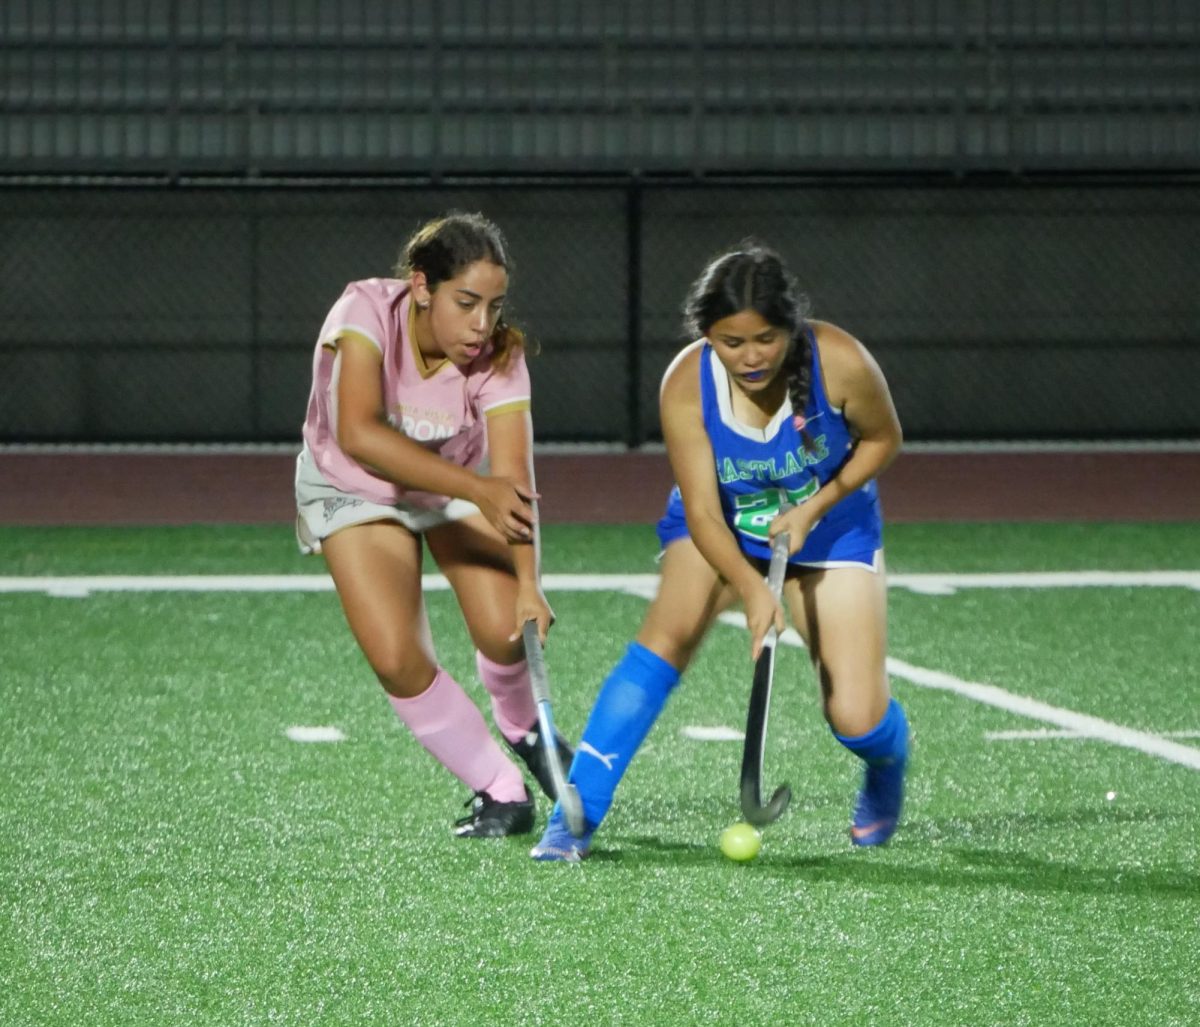 On Oct. 25,  the Bonita Vista High (BVH) girls’ Field Hockey team face off against Eastlake High (ELH), a school in the district known for rivaling against BVH. This high octane game was fueled with the competitive spirit of old rivals facing off against each other.